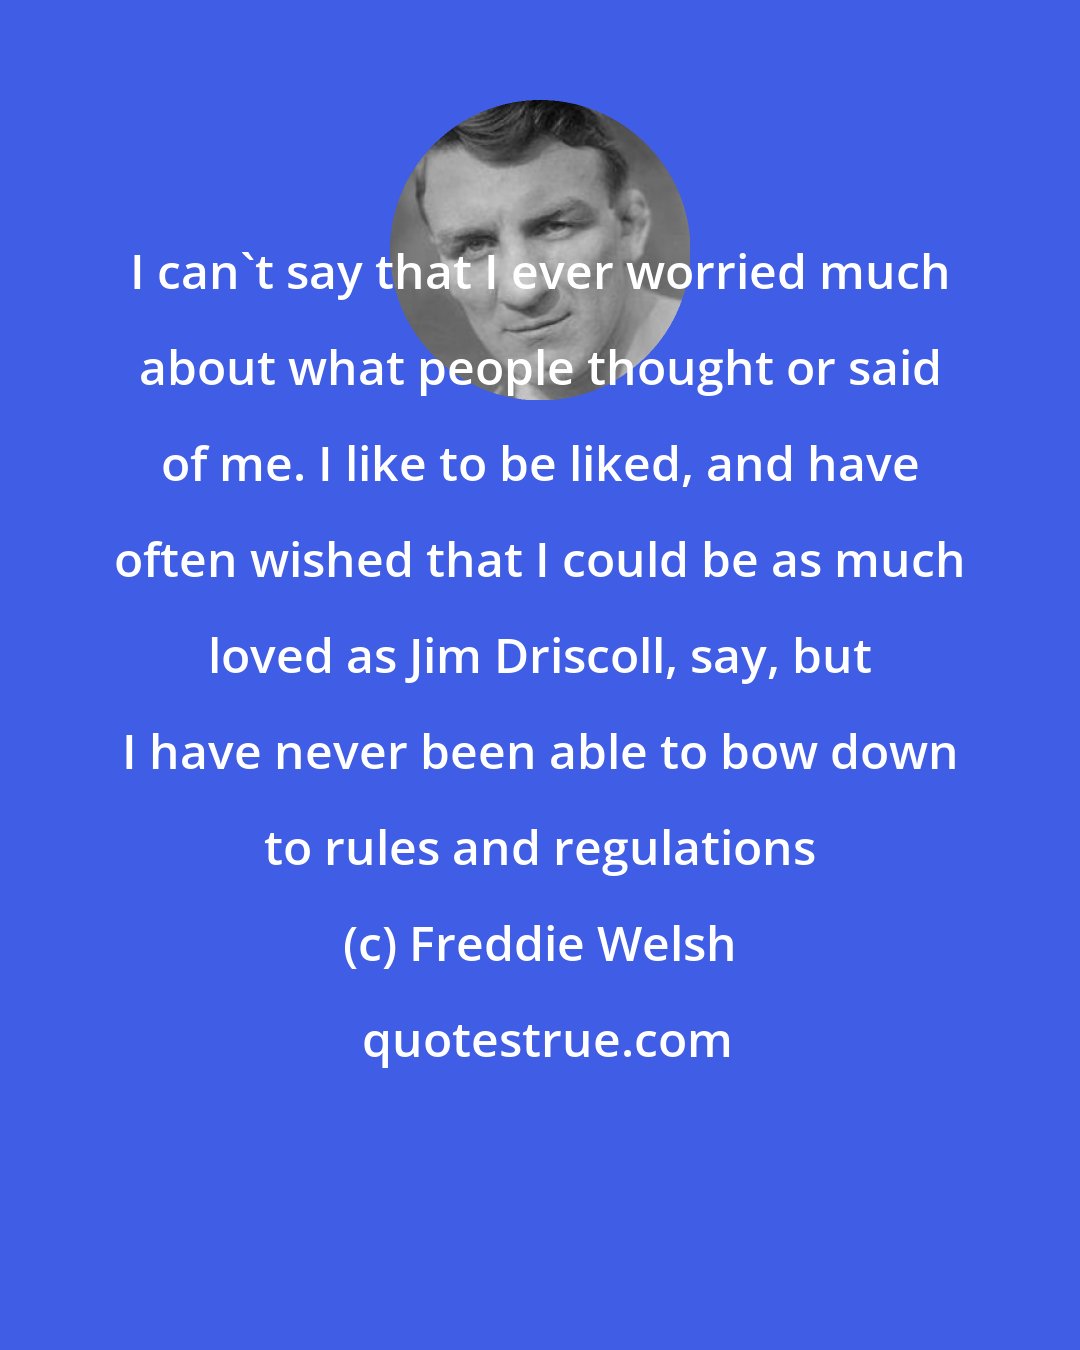 Freddie Welsh: I can't say that I ever worried much about what people thought or said of me. I like to be liked, and have often wished that I could be as much loved as Jim Driscoll, say, but I have never been able to bow down to rules and regulations